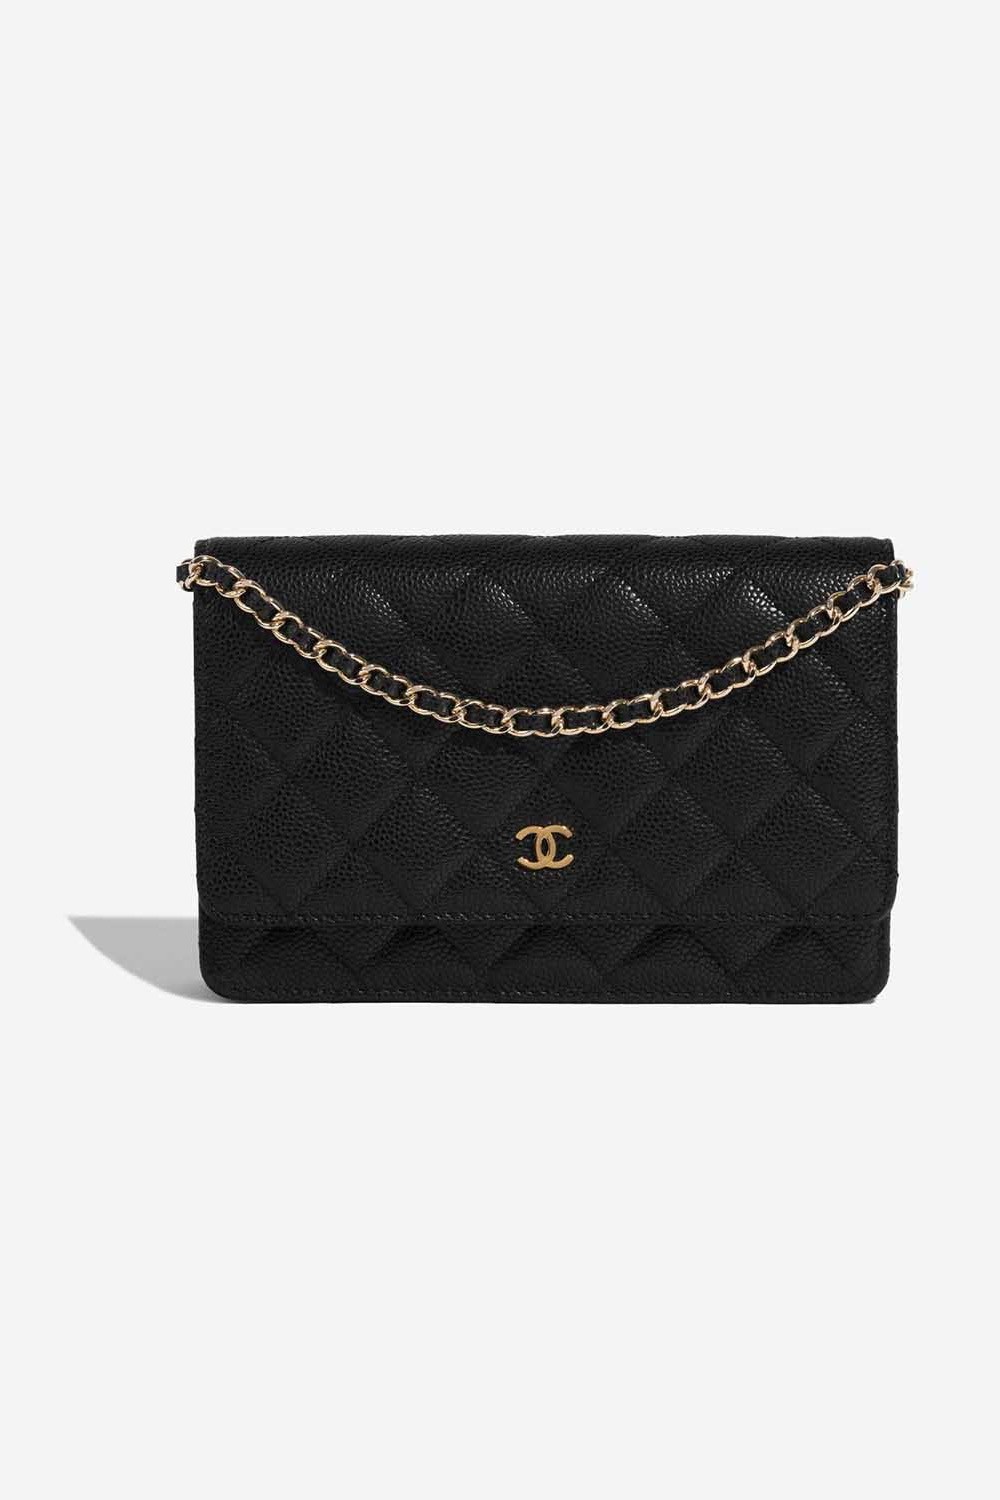 Chanel woc wallet of chain caviar black gold top  Chanel classic flap bag,  Coco chanel bags, Chanel bag classic